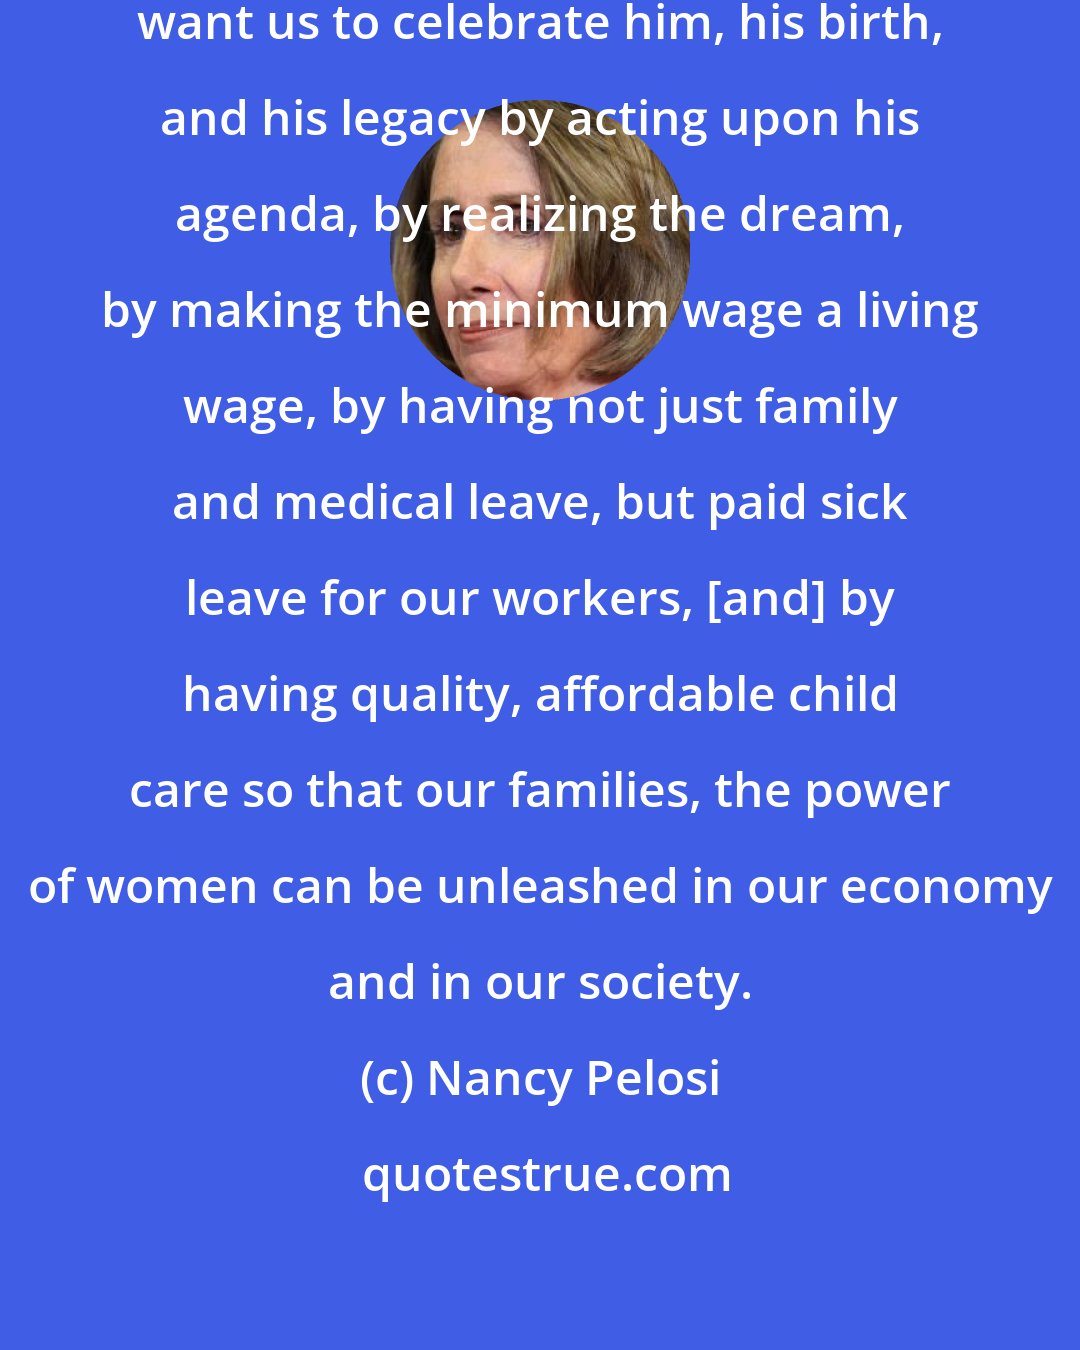 Nancy Pelosi: [Martin Luther King, Jr.] would want us to celebrate him, his birth, and his legacy by acting upon his agenda, by realizing the dream, by making the minimum wage a living wage, by having not just family and medical leave, but paid sick leave for our workers, [and] by having quality, affordable child care so that our families, the power of women can be unleashed in our economy and in our society.